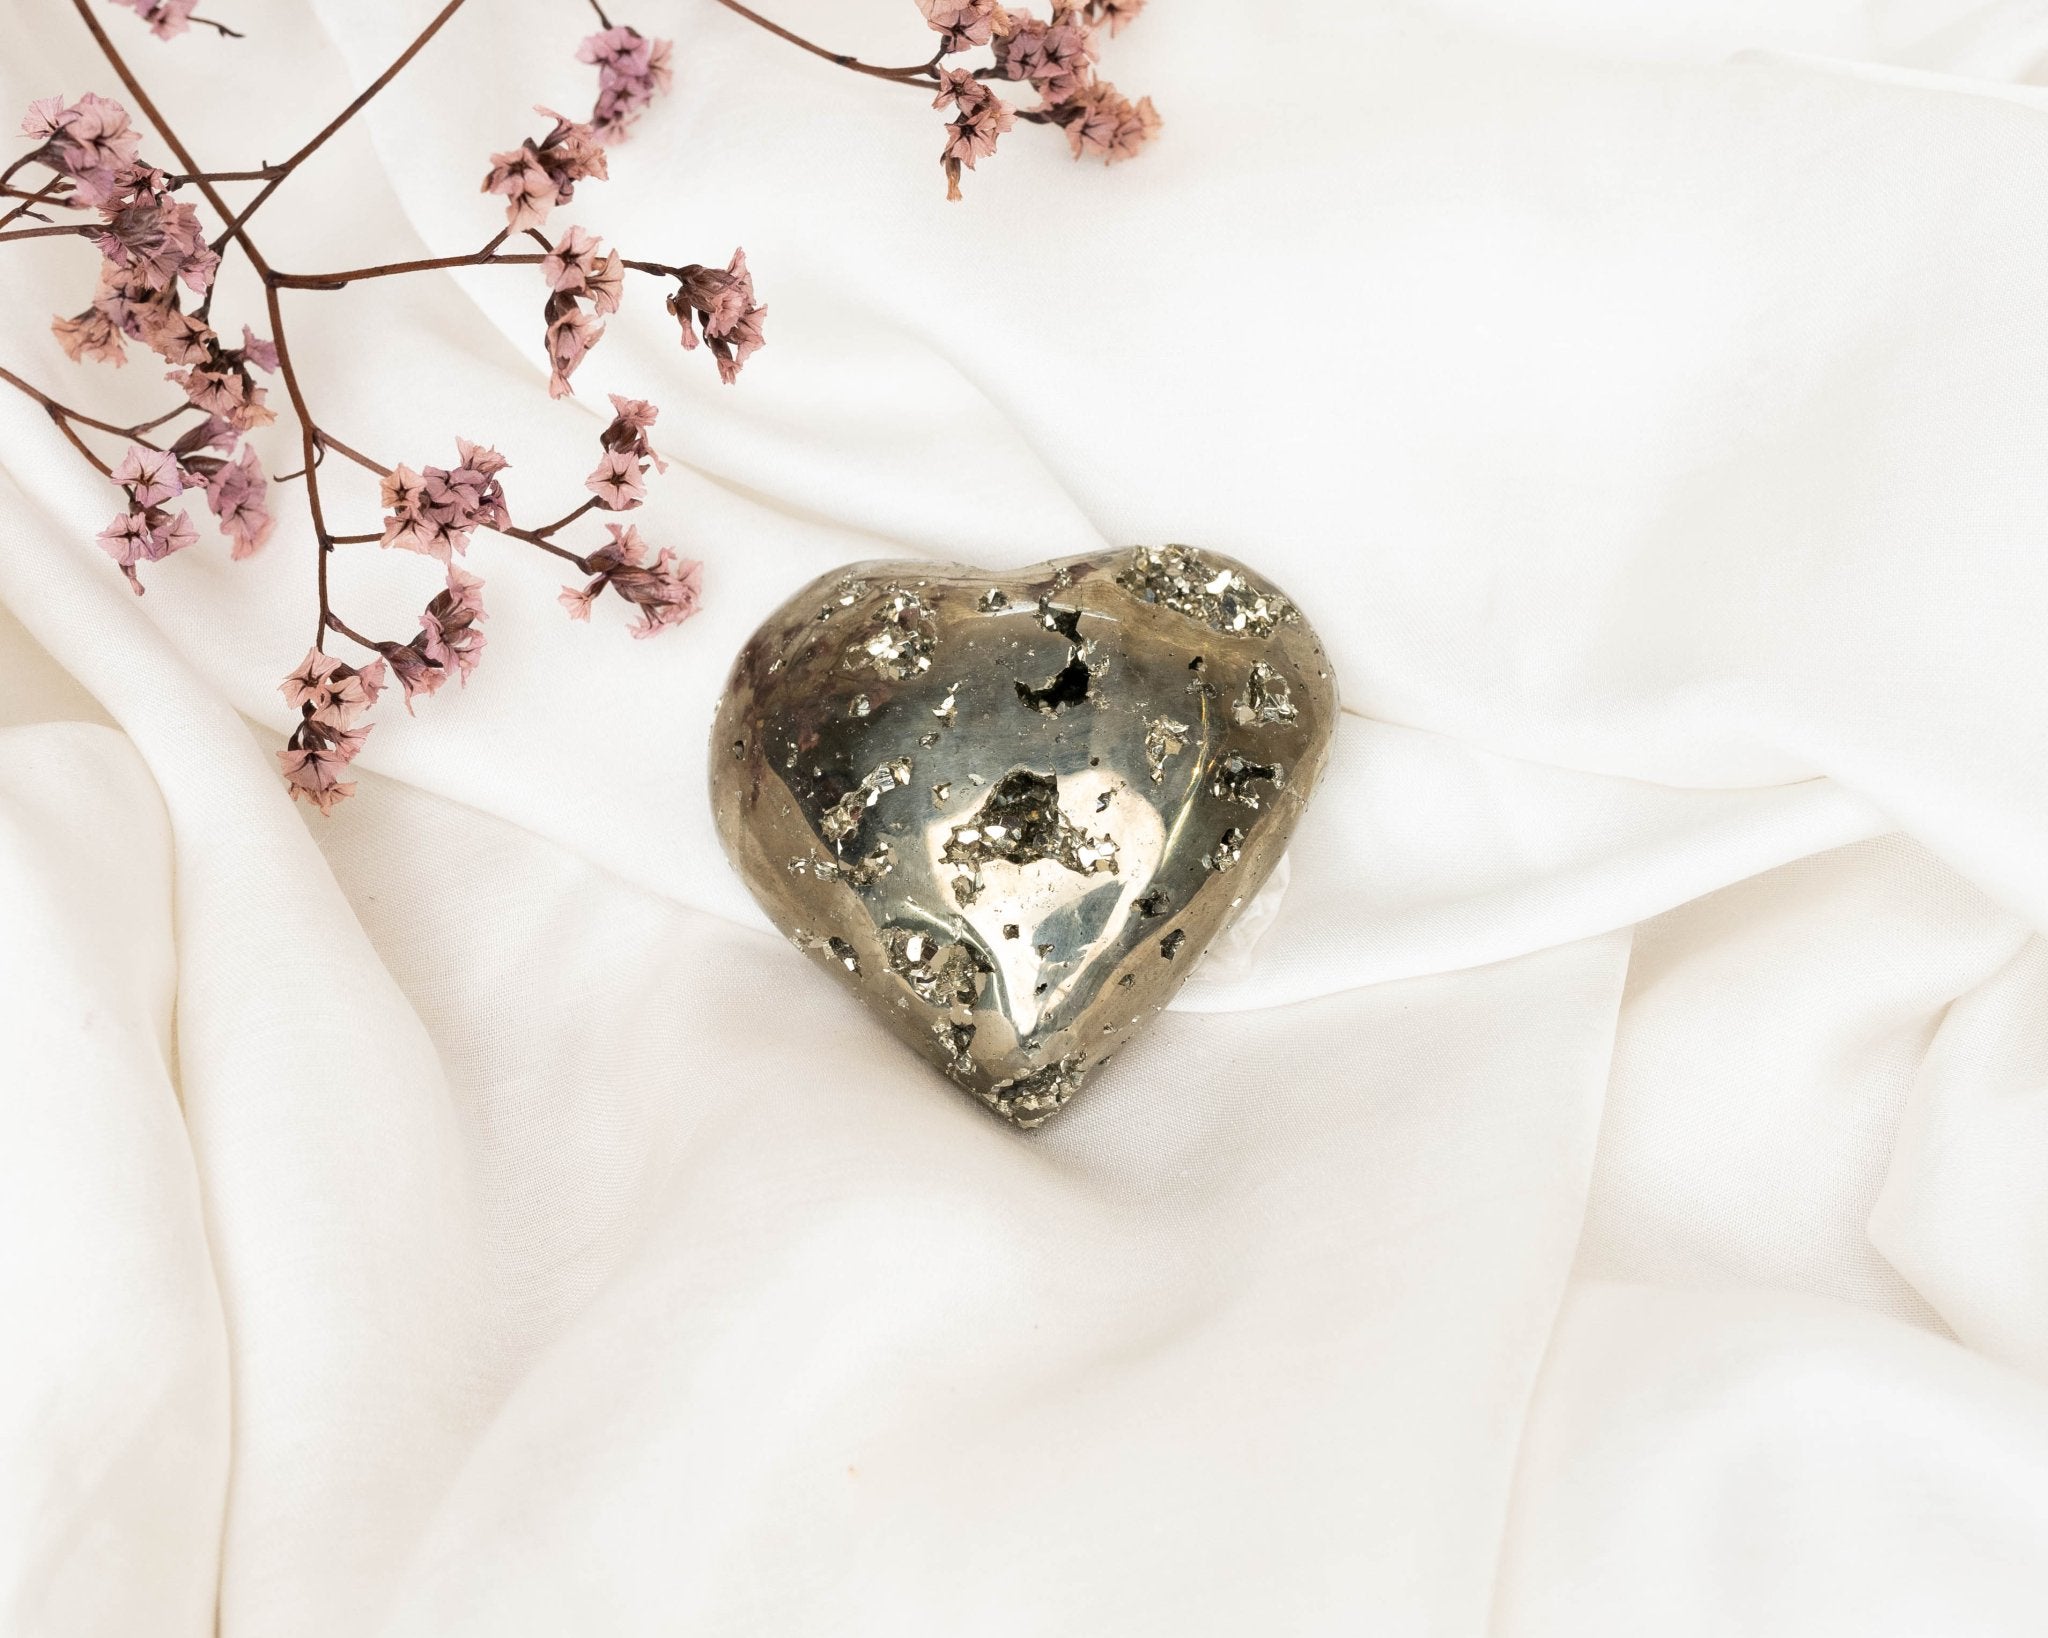 Iron Pyrite Heart 177.9g - Bodh Gem and Crystals